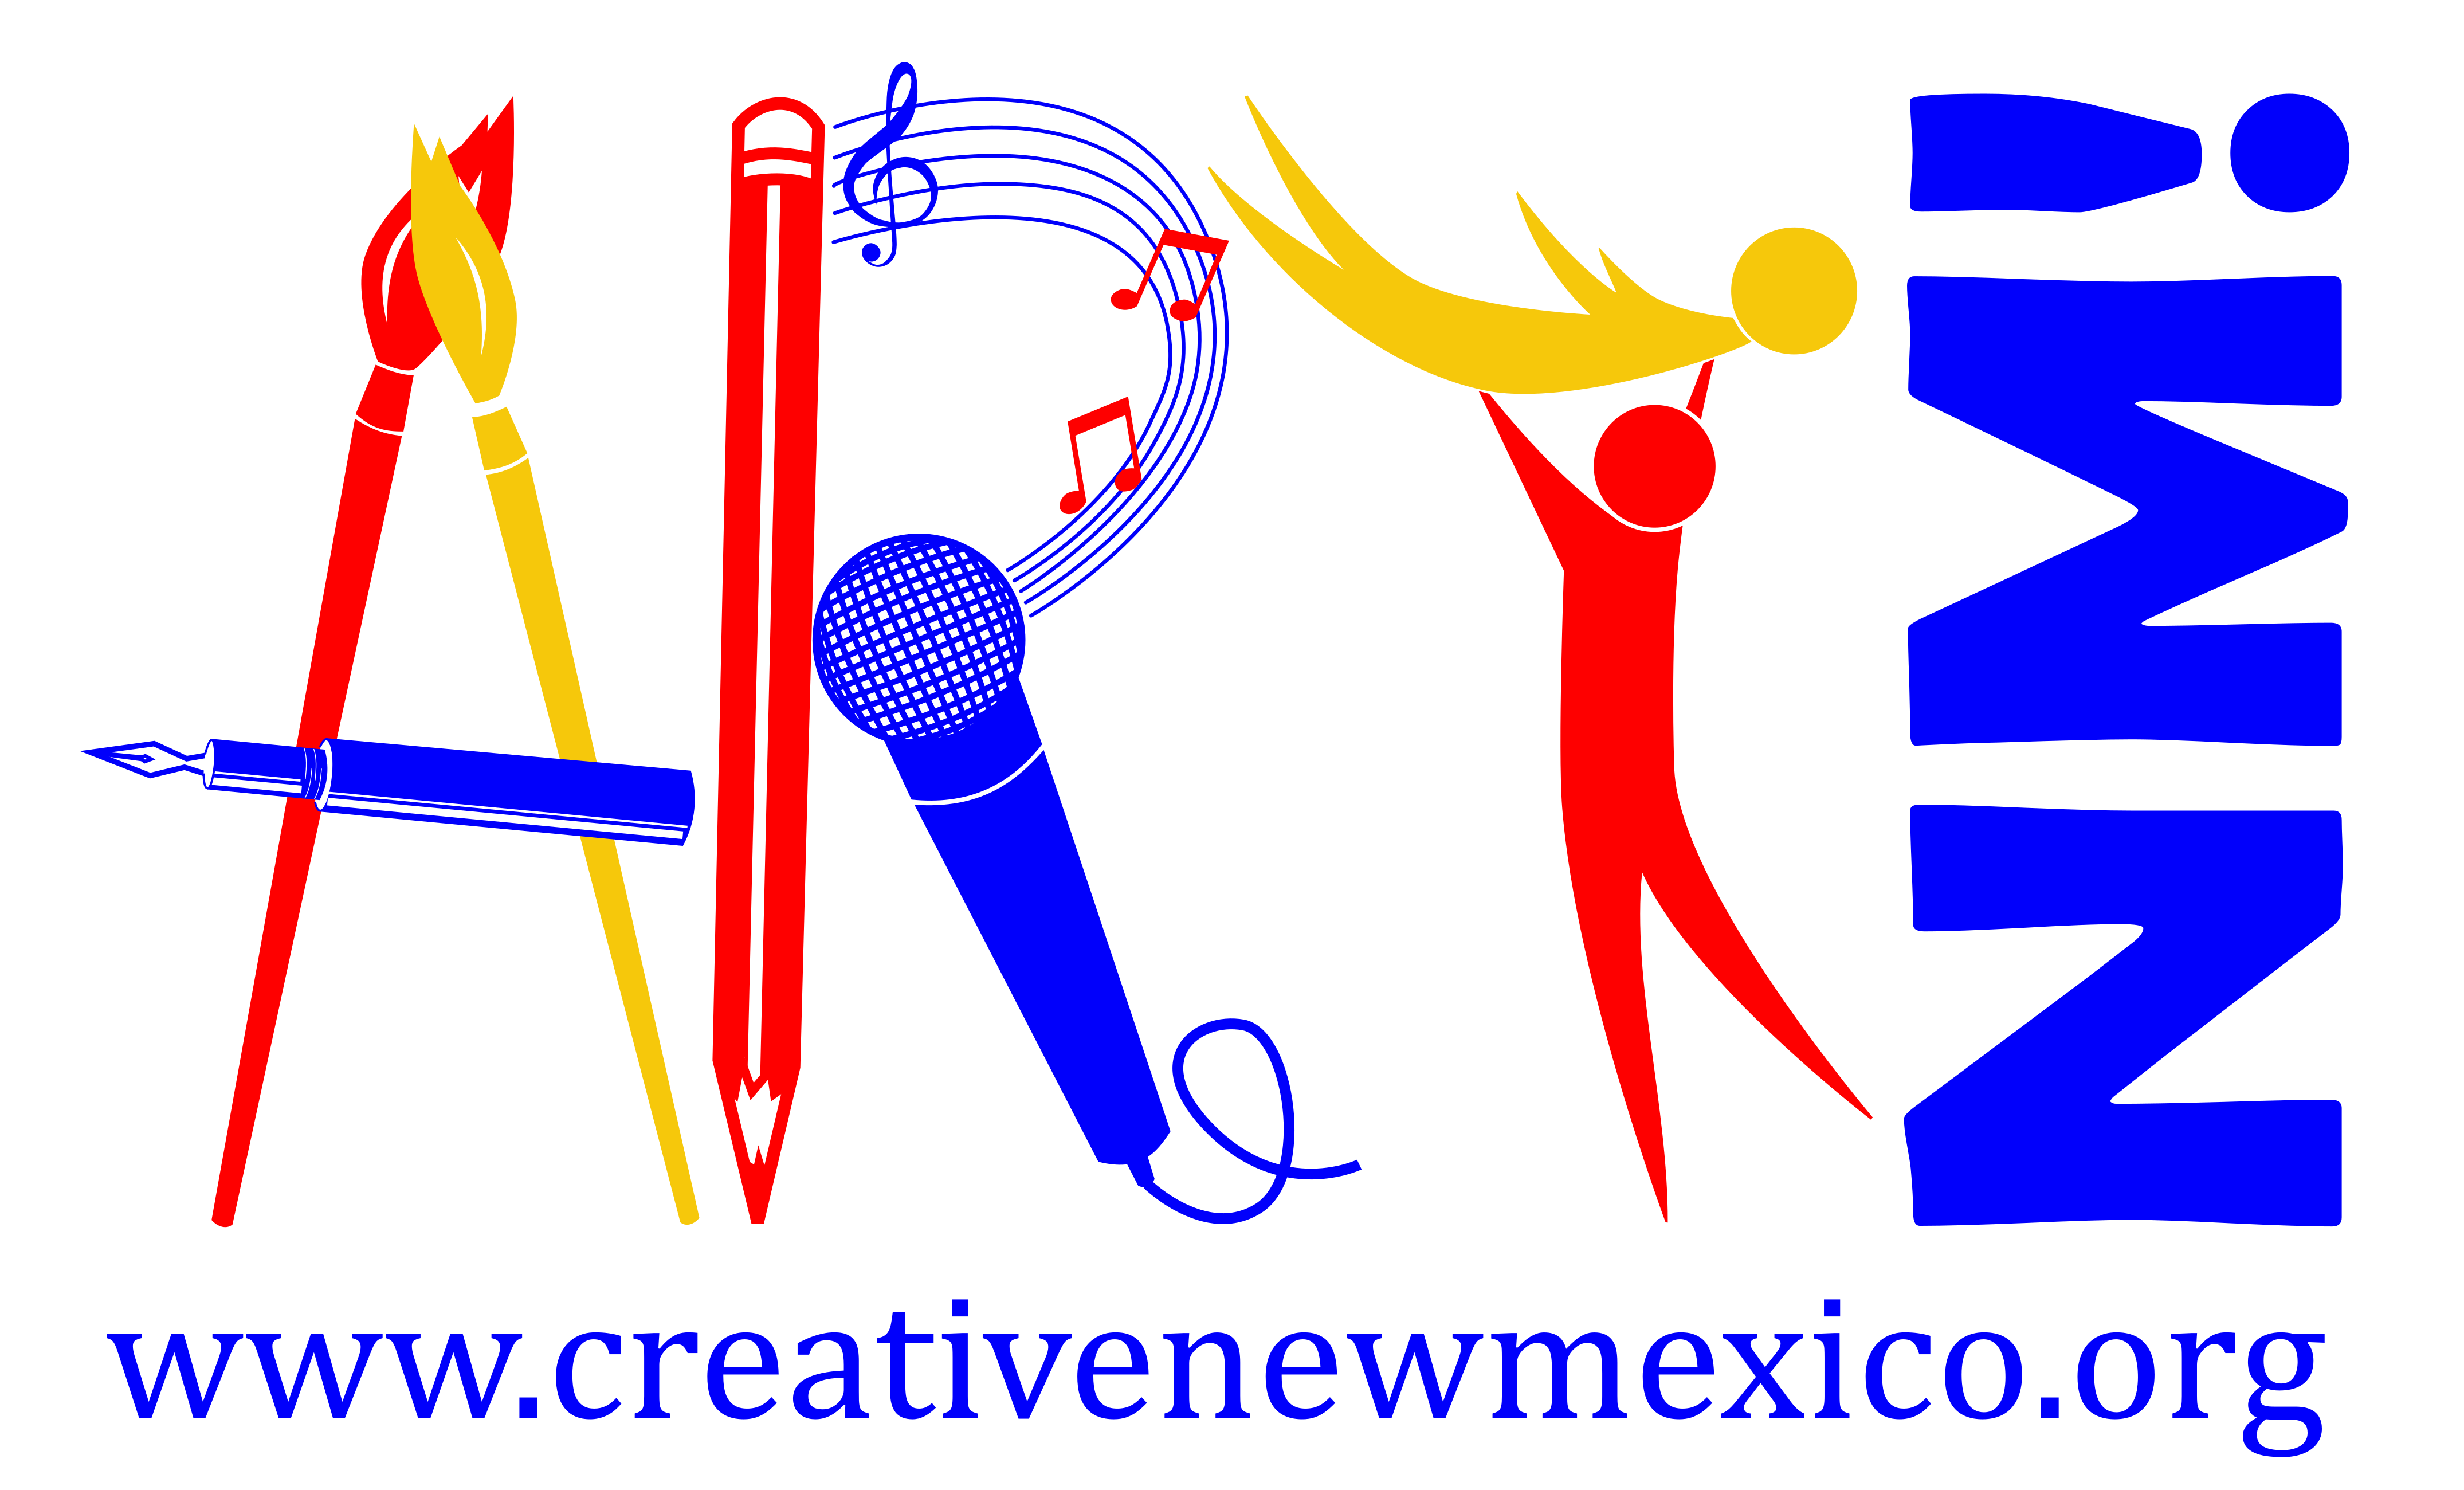 A logo for the Art NM event. The A, R, and T letters are created using artistic objects, like a microphone, paintbrushes, and dancing people.